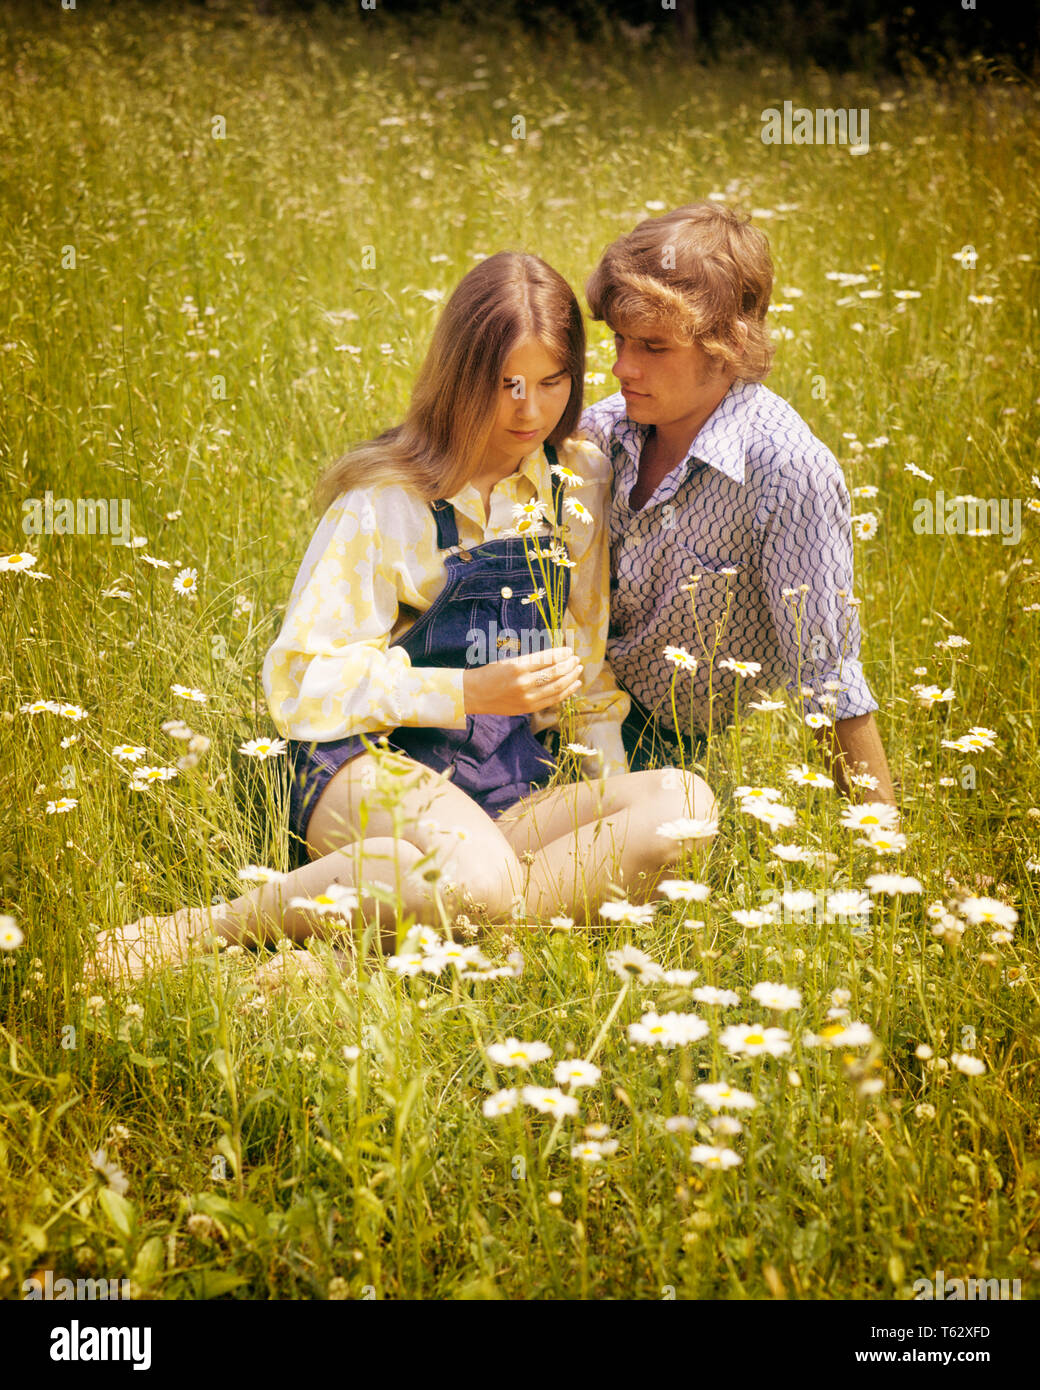 1970s ROMANTIC TEEN COUPLE IN FIELD OF DAISIES - kj6266 HAR001 HARS COPY SPACE FRIENDSHIP HALF-LENGTH PERSONS CARING MALES TEENAGE GIRL TEENAGE BOY DENIM SUMMERTIME DATING DAISIES HAPPINESS HIGH ANGLE HAIRSTYLE ATTRACTION RELATIONSHIPS CONNECTION COURTSHIP HAIRSTYLES STYLISH TEENAGED POSSIBILITY JUVENILES SOCIAL ACTIVITY TOGETHERNESS CAUCASIAN ETHNICITY COURTING HAR001 OLD FASHIONED Stock Photo